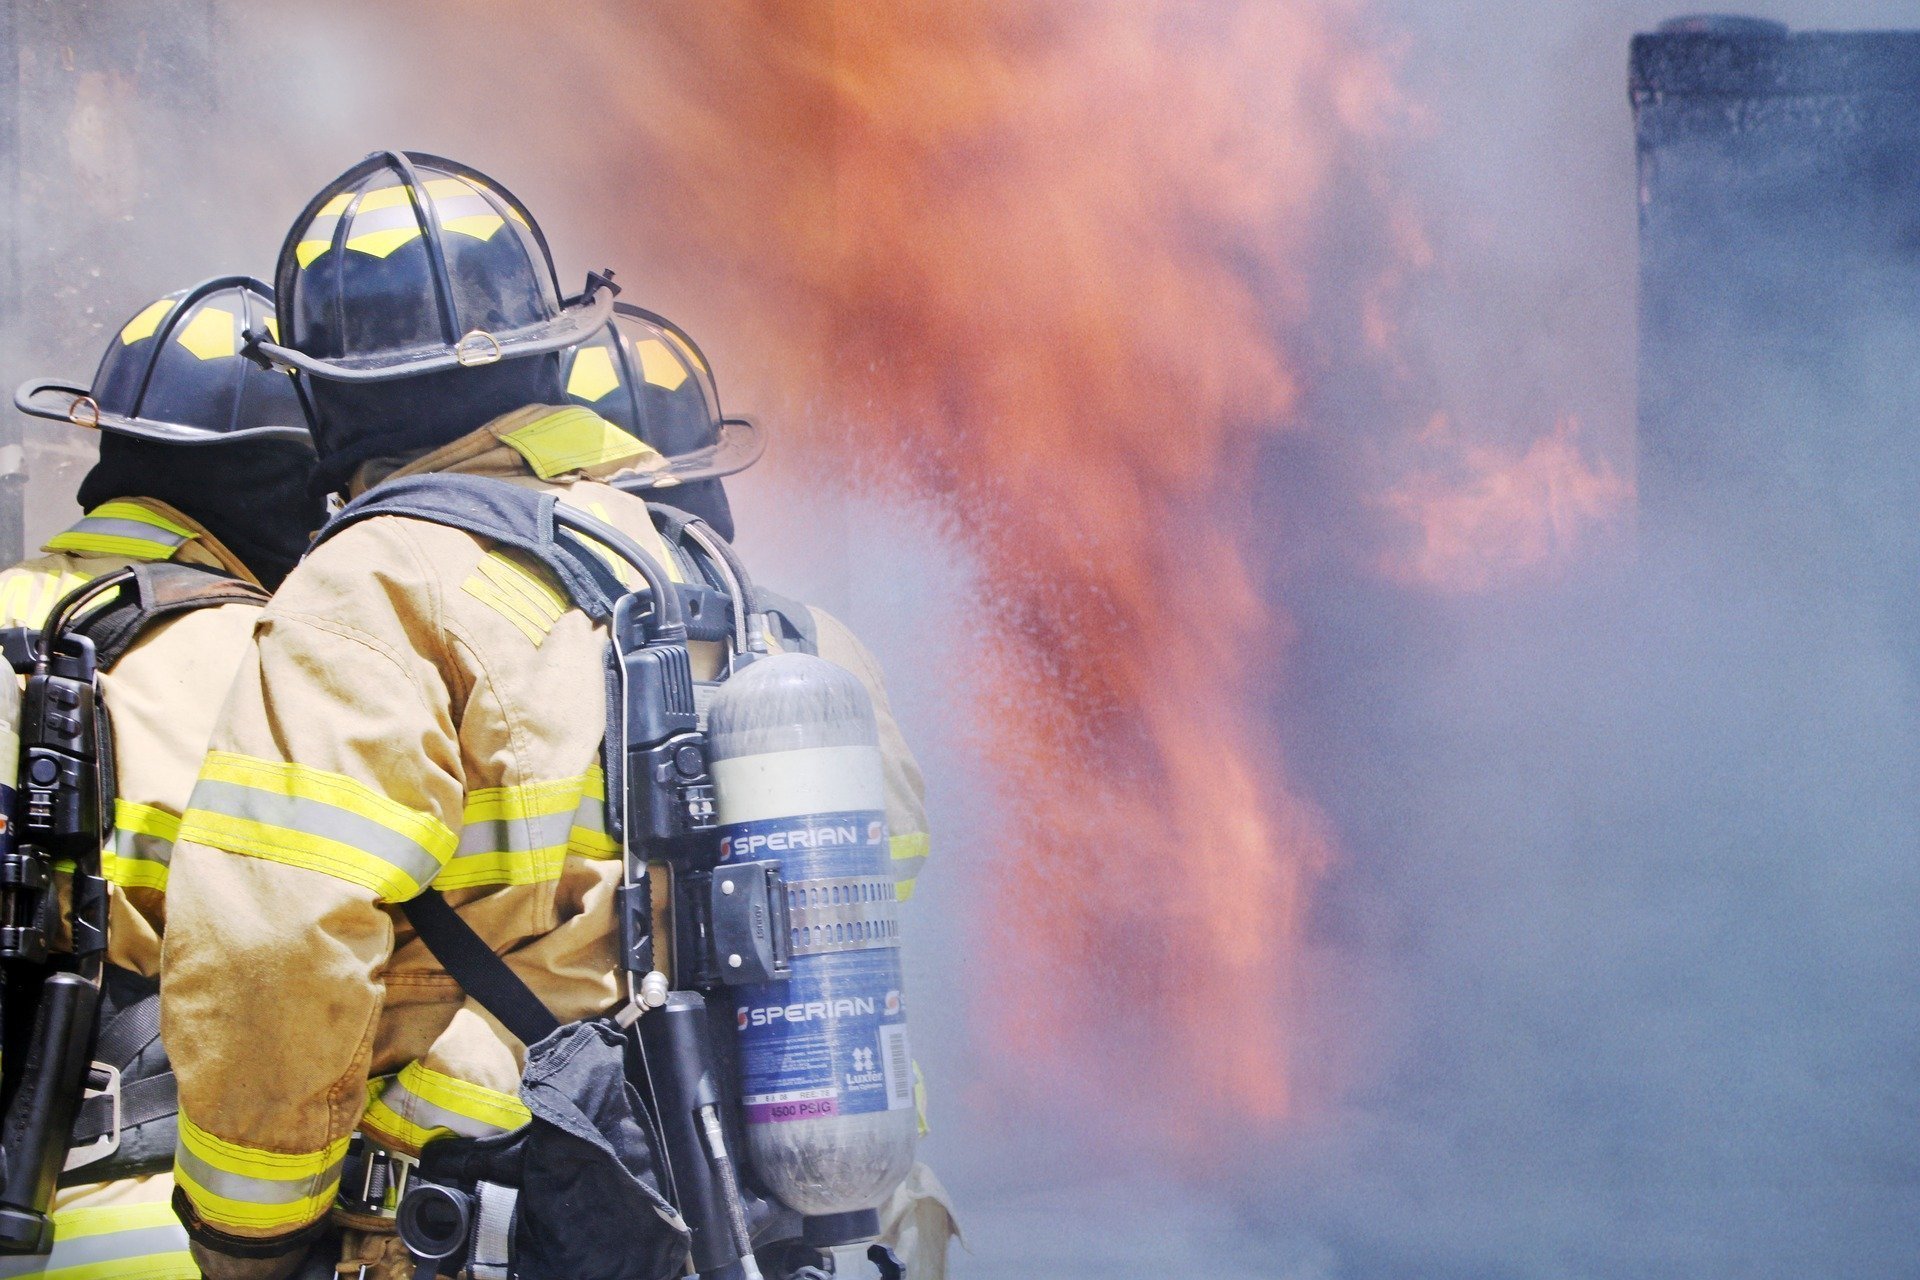 Firemen trying to put down a fire. | Photo: Pixabay